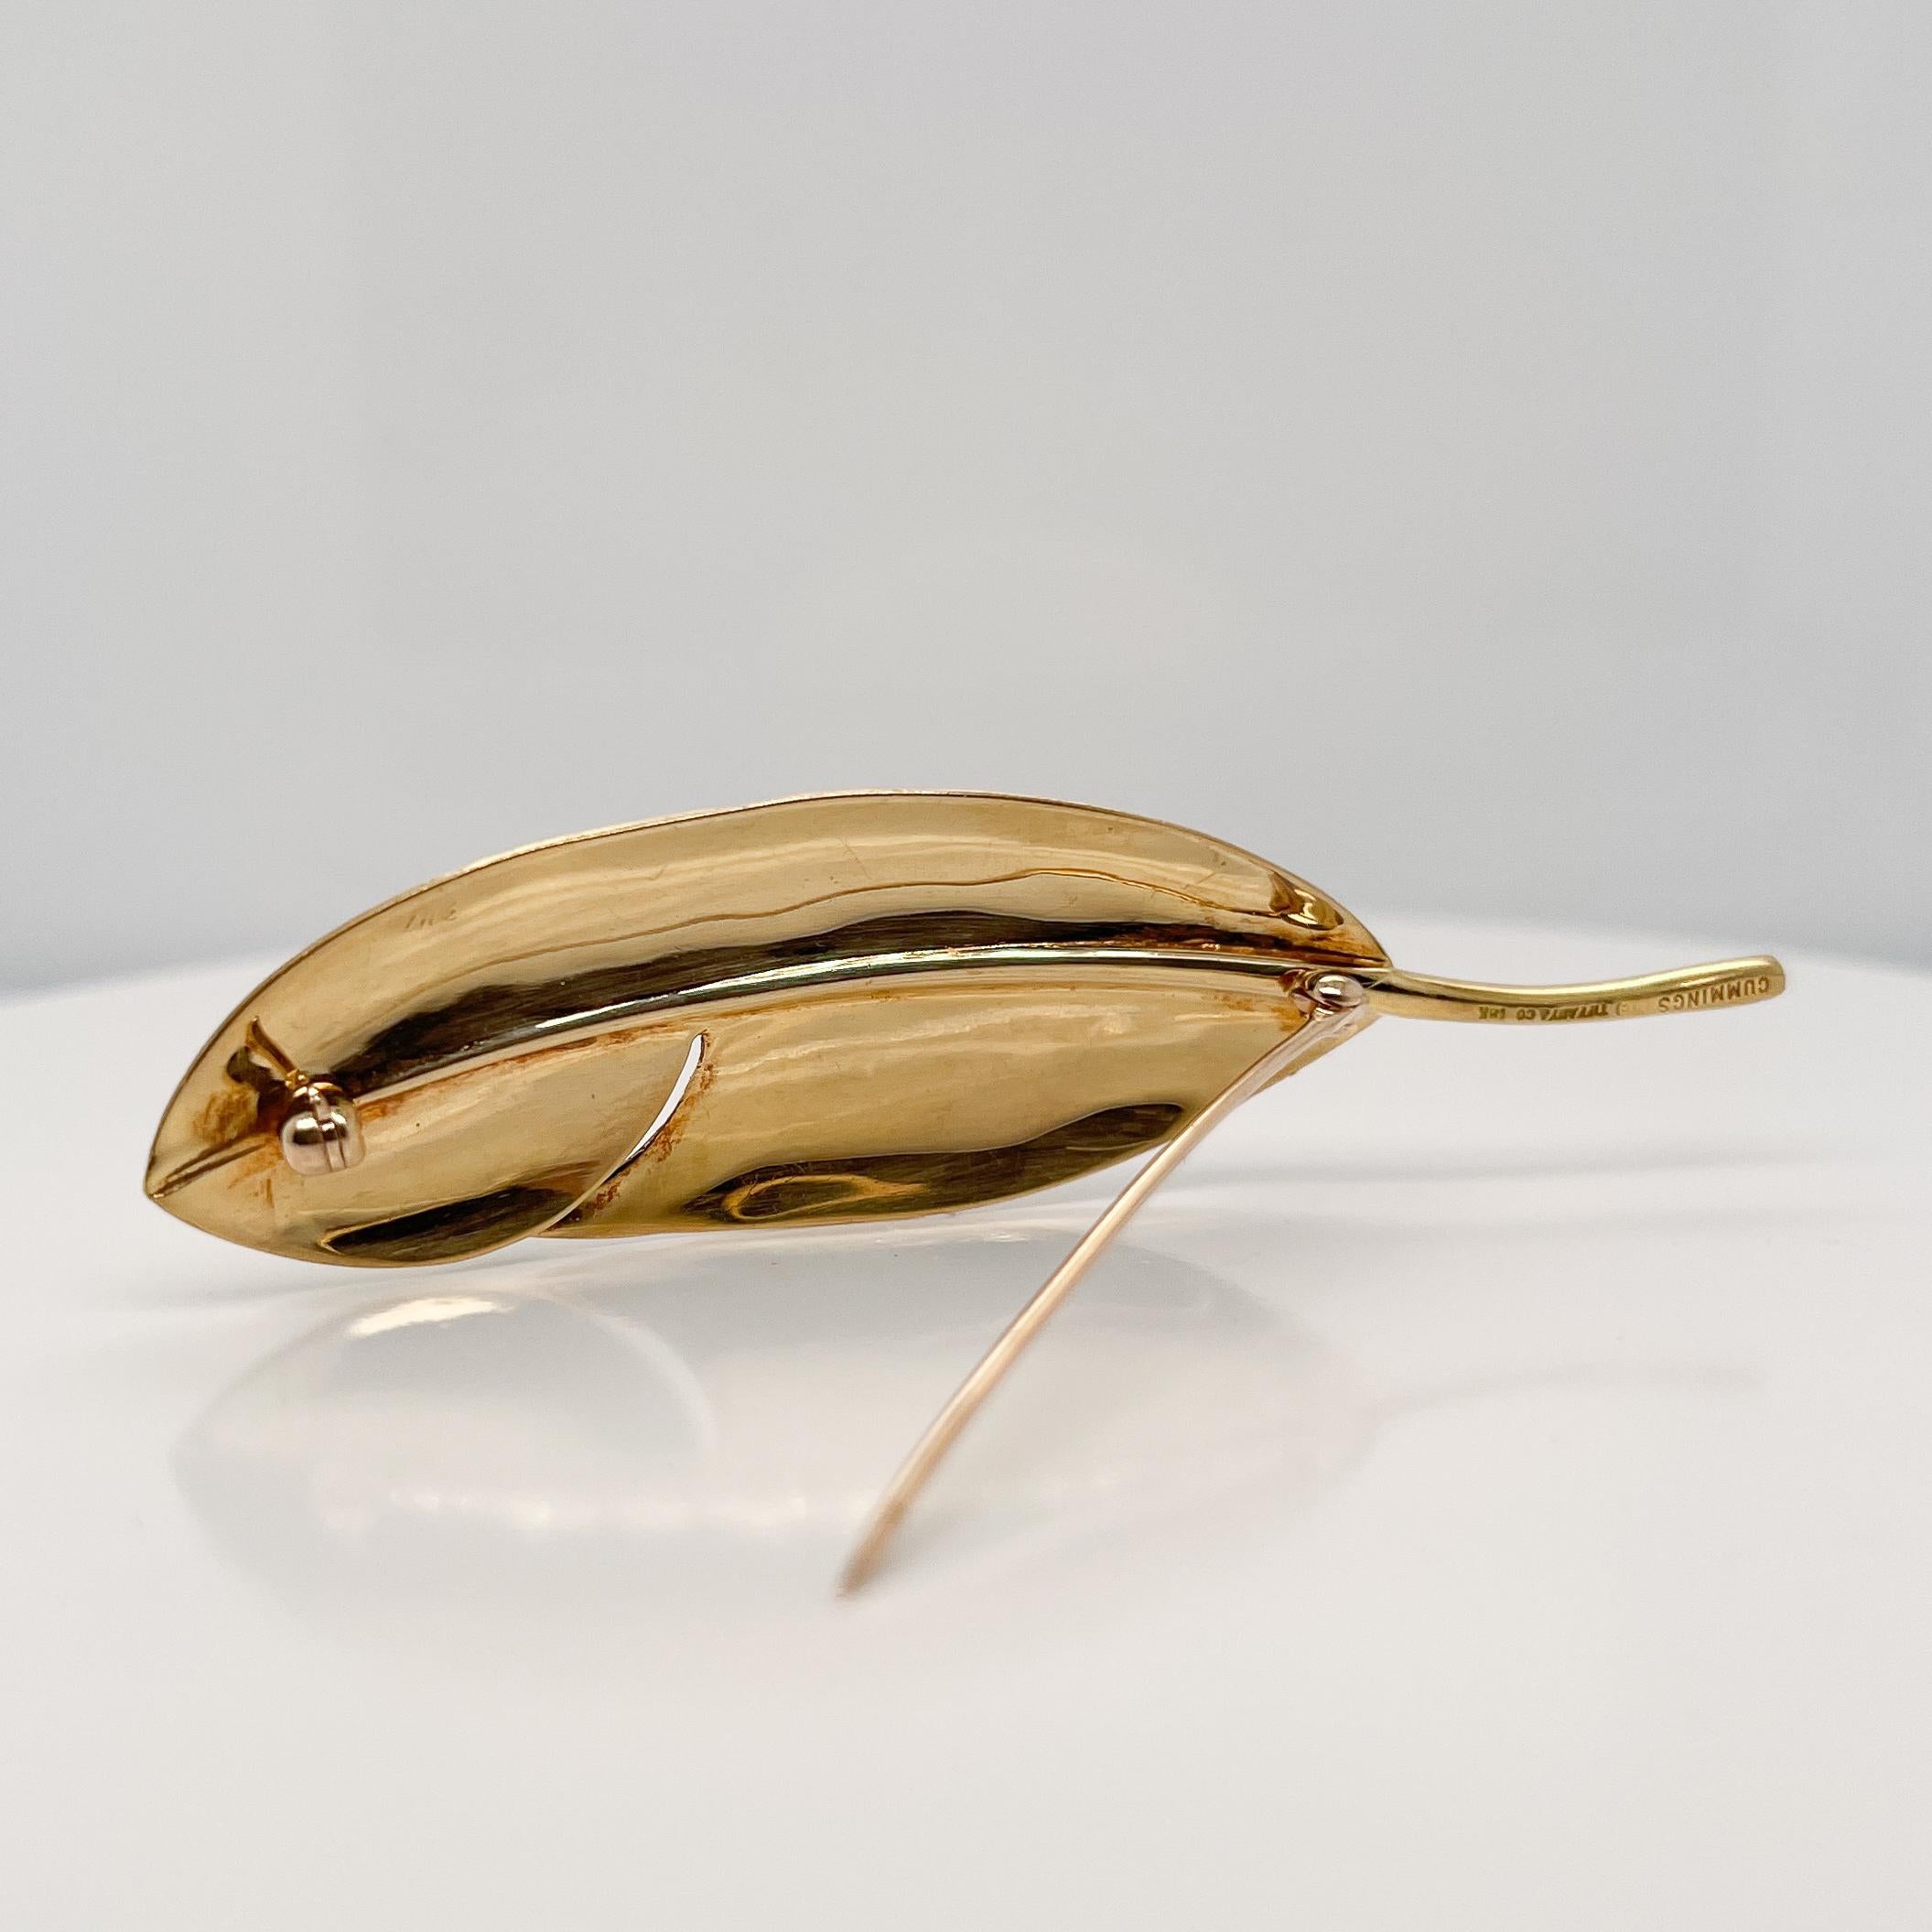 18 Karat Yellow Gold Leaf or Feather Brooch by Angela Cummings for Tiffany & Co. For Sale 5